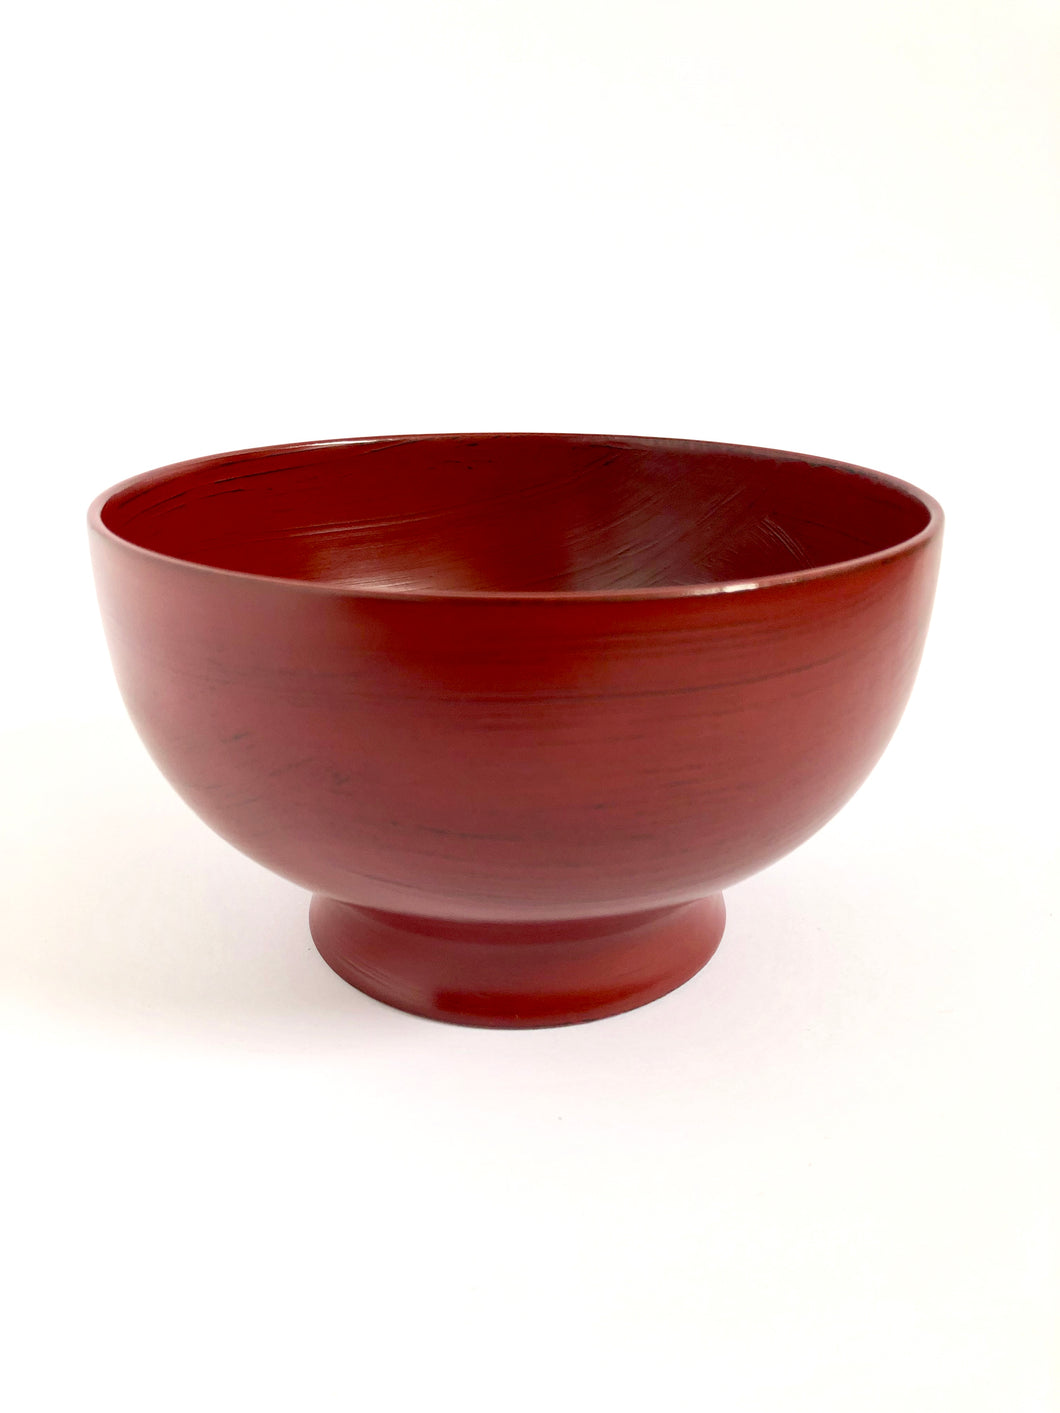 Japanese Lacquered Multi Use Bowl